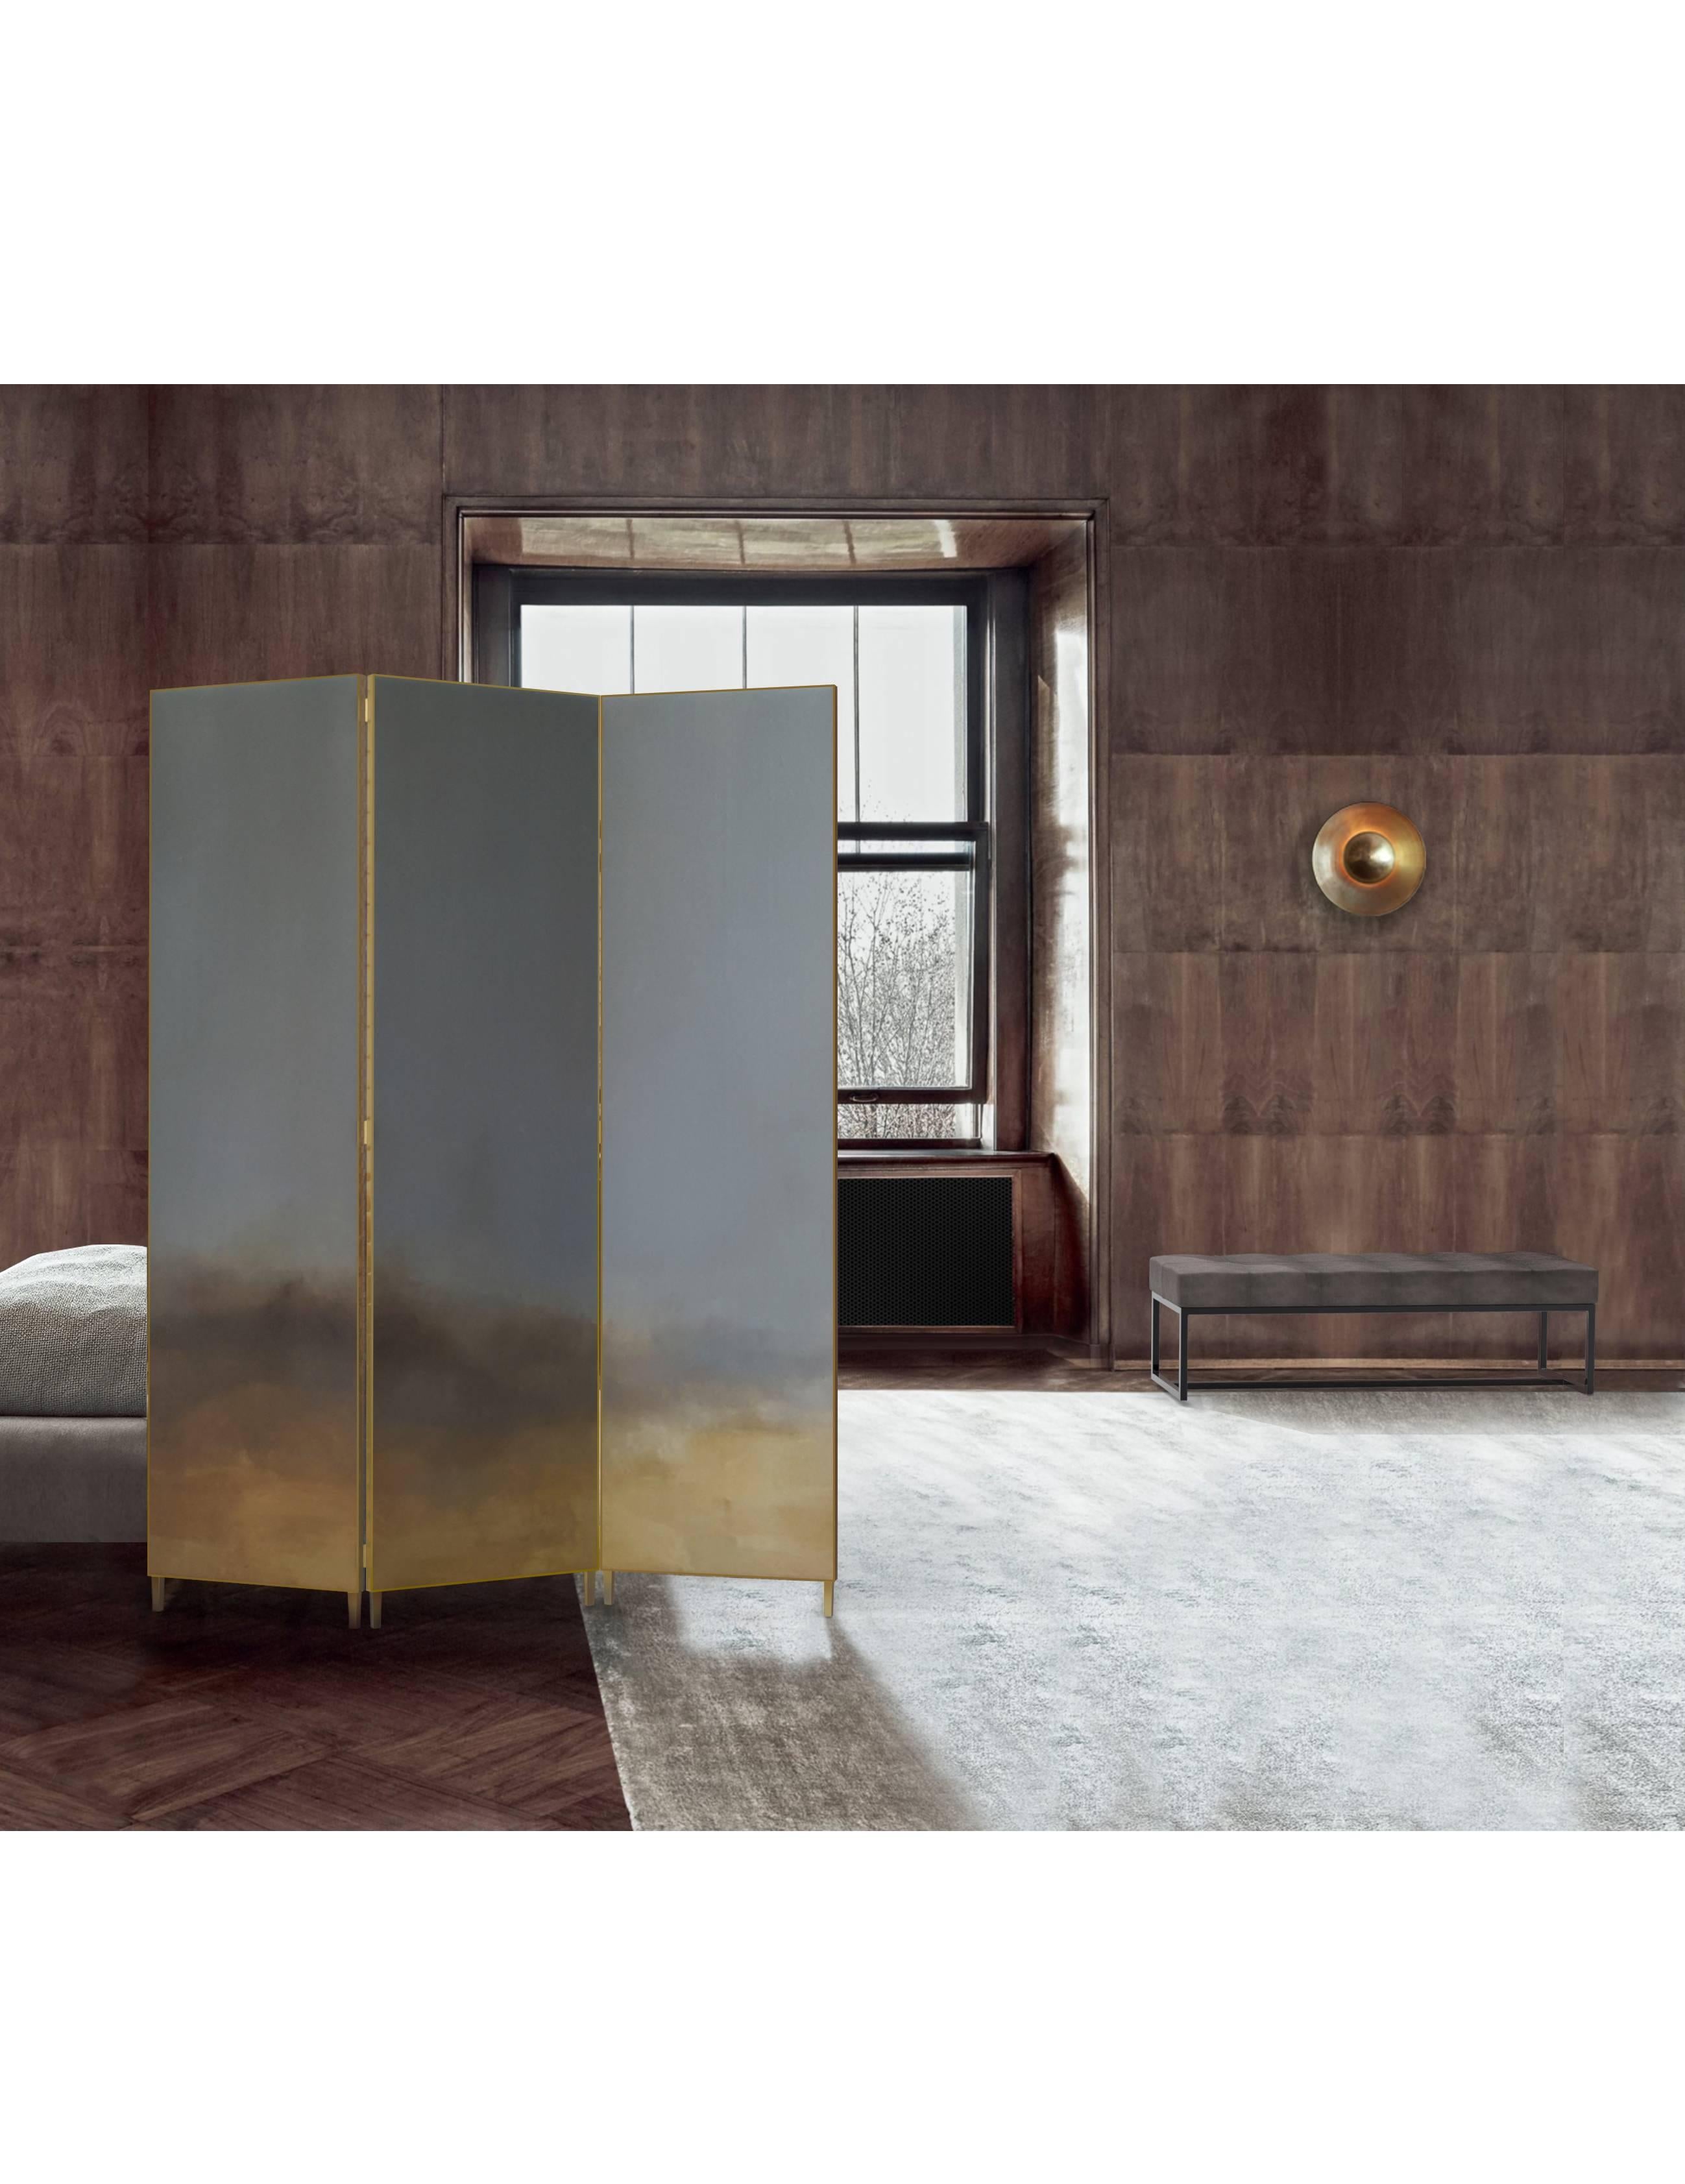 Hand painted cloth in a full brass frame. It is delicate and beautiful solution to divide the space. Each screen is different and unusual because of the painting created by the artist.
Full brass frame
hand painted on both sides of the